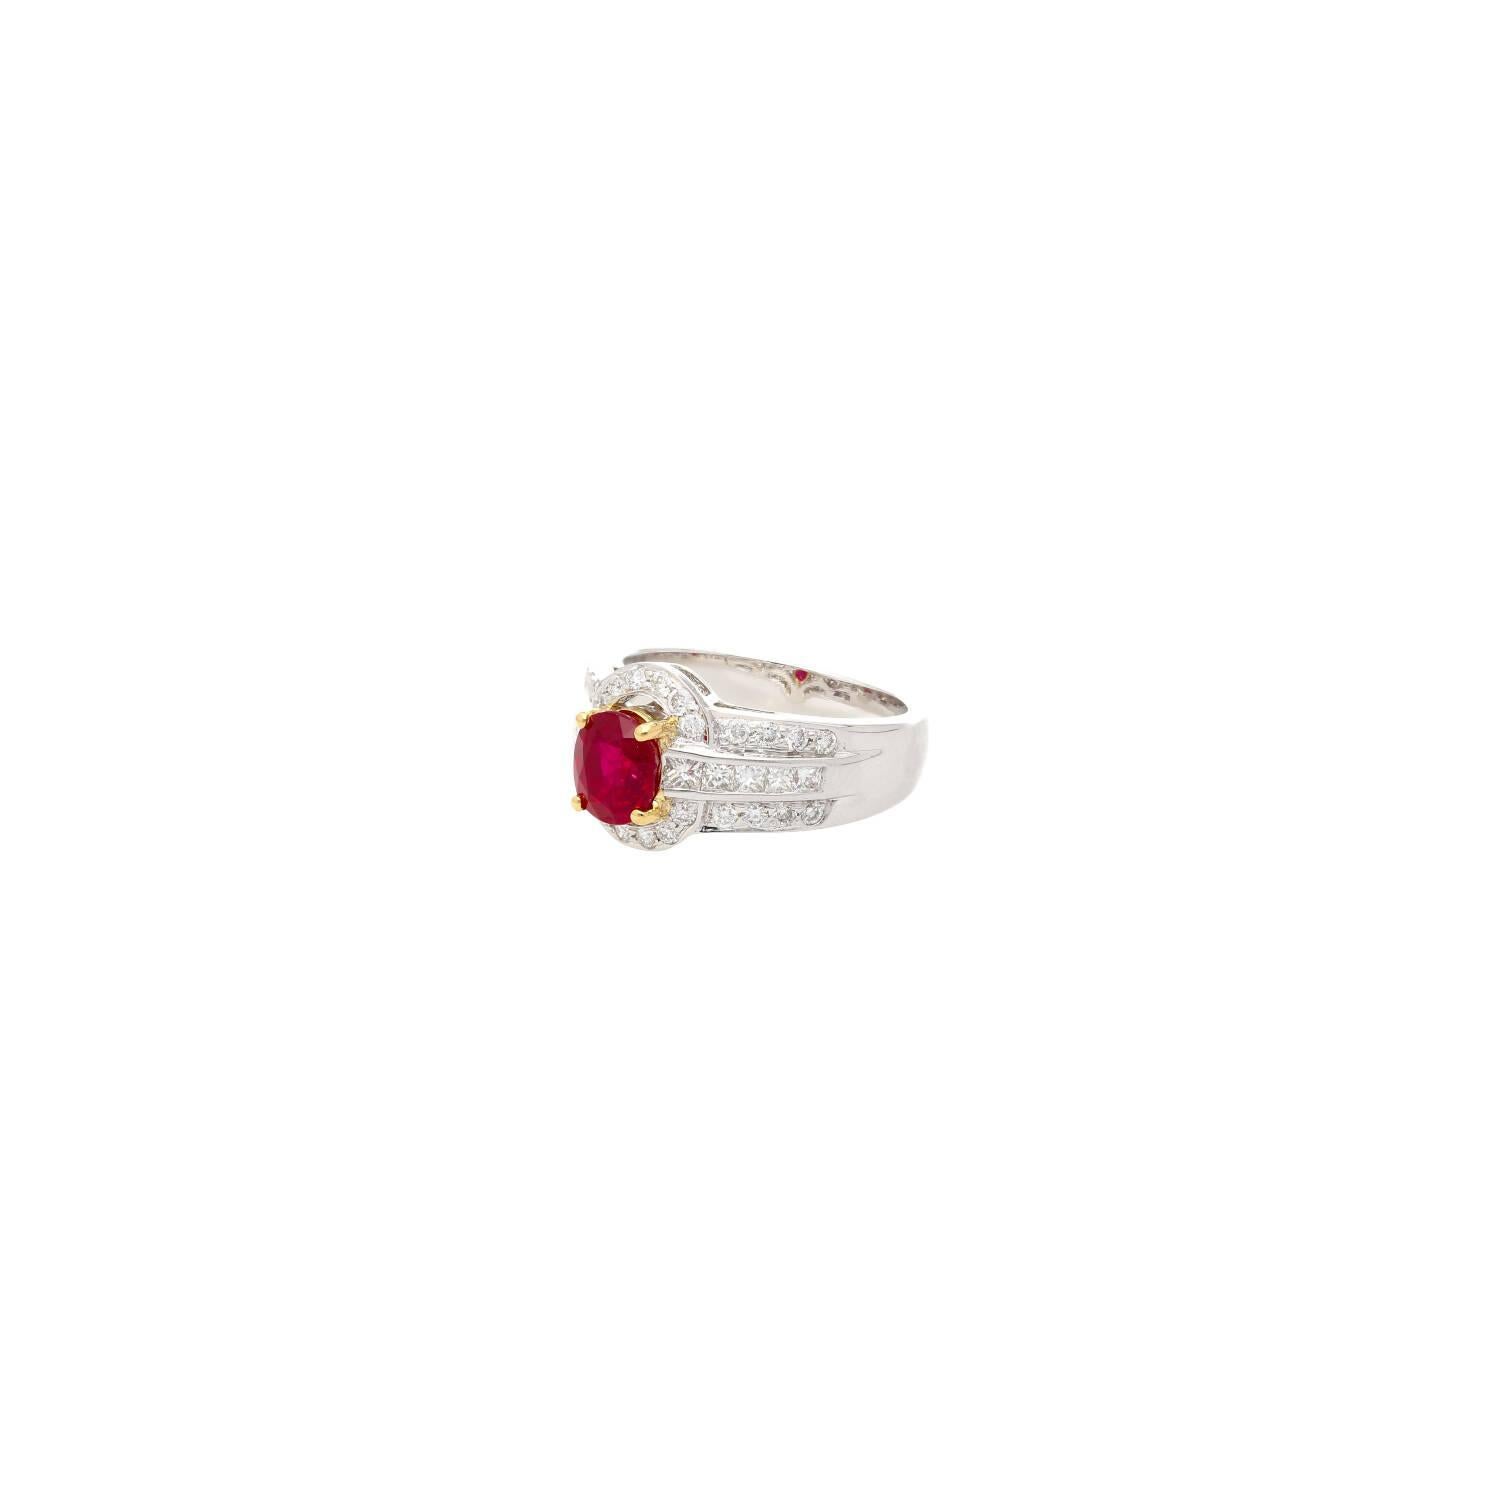 GRS Certified 1.37 Carat Burma Pigeon Blood Ruby & Diamond Ring in 18K Gold For Sale 1